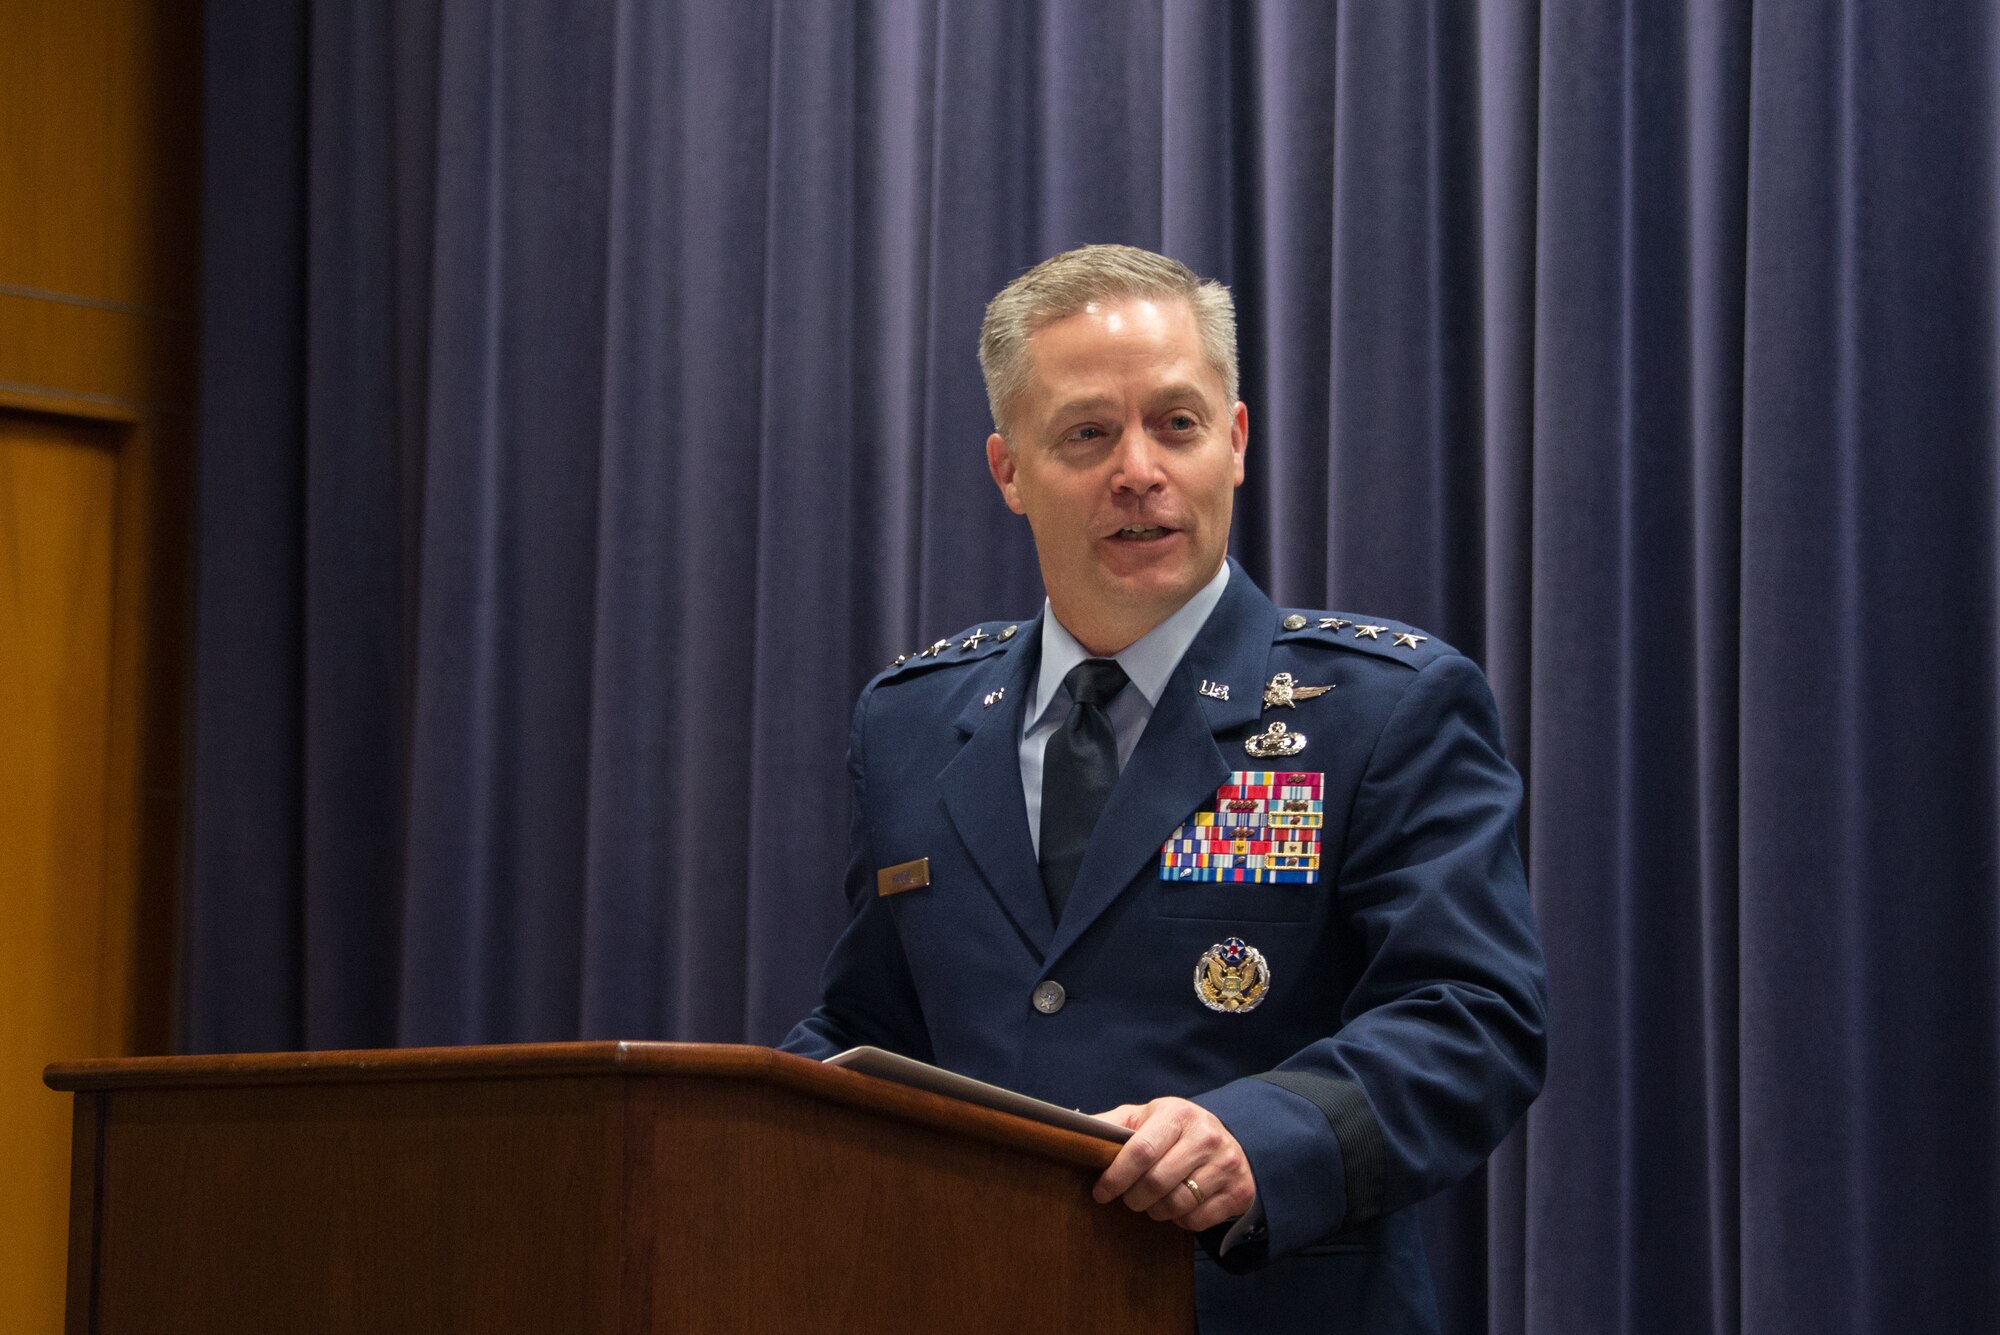 Lt. Gen Timothy Haugh, Sixteenth Air Force commander, speaks during the 557th Weather Wing’s Sixteenth Air Force reassignment ceremony at the wing’s headquarters building, Offutt Air Force Base, Nebraska, Oct. 29, 2019. Sixteenth Air Force is headquartered at Joint Base San Antonio-Lackland, Texas, and is the Air Force’s first information warfare NAF. (U.S. Air Force photo by Paul Shirk)